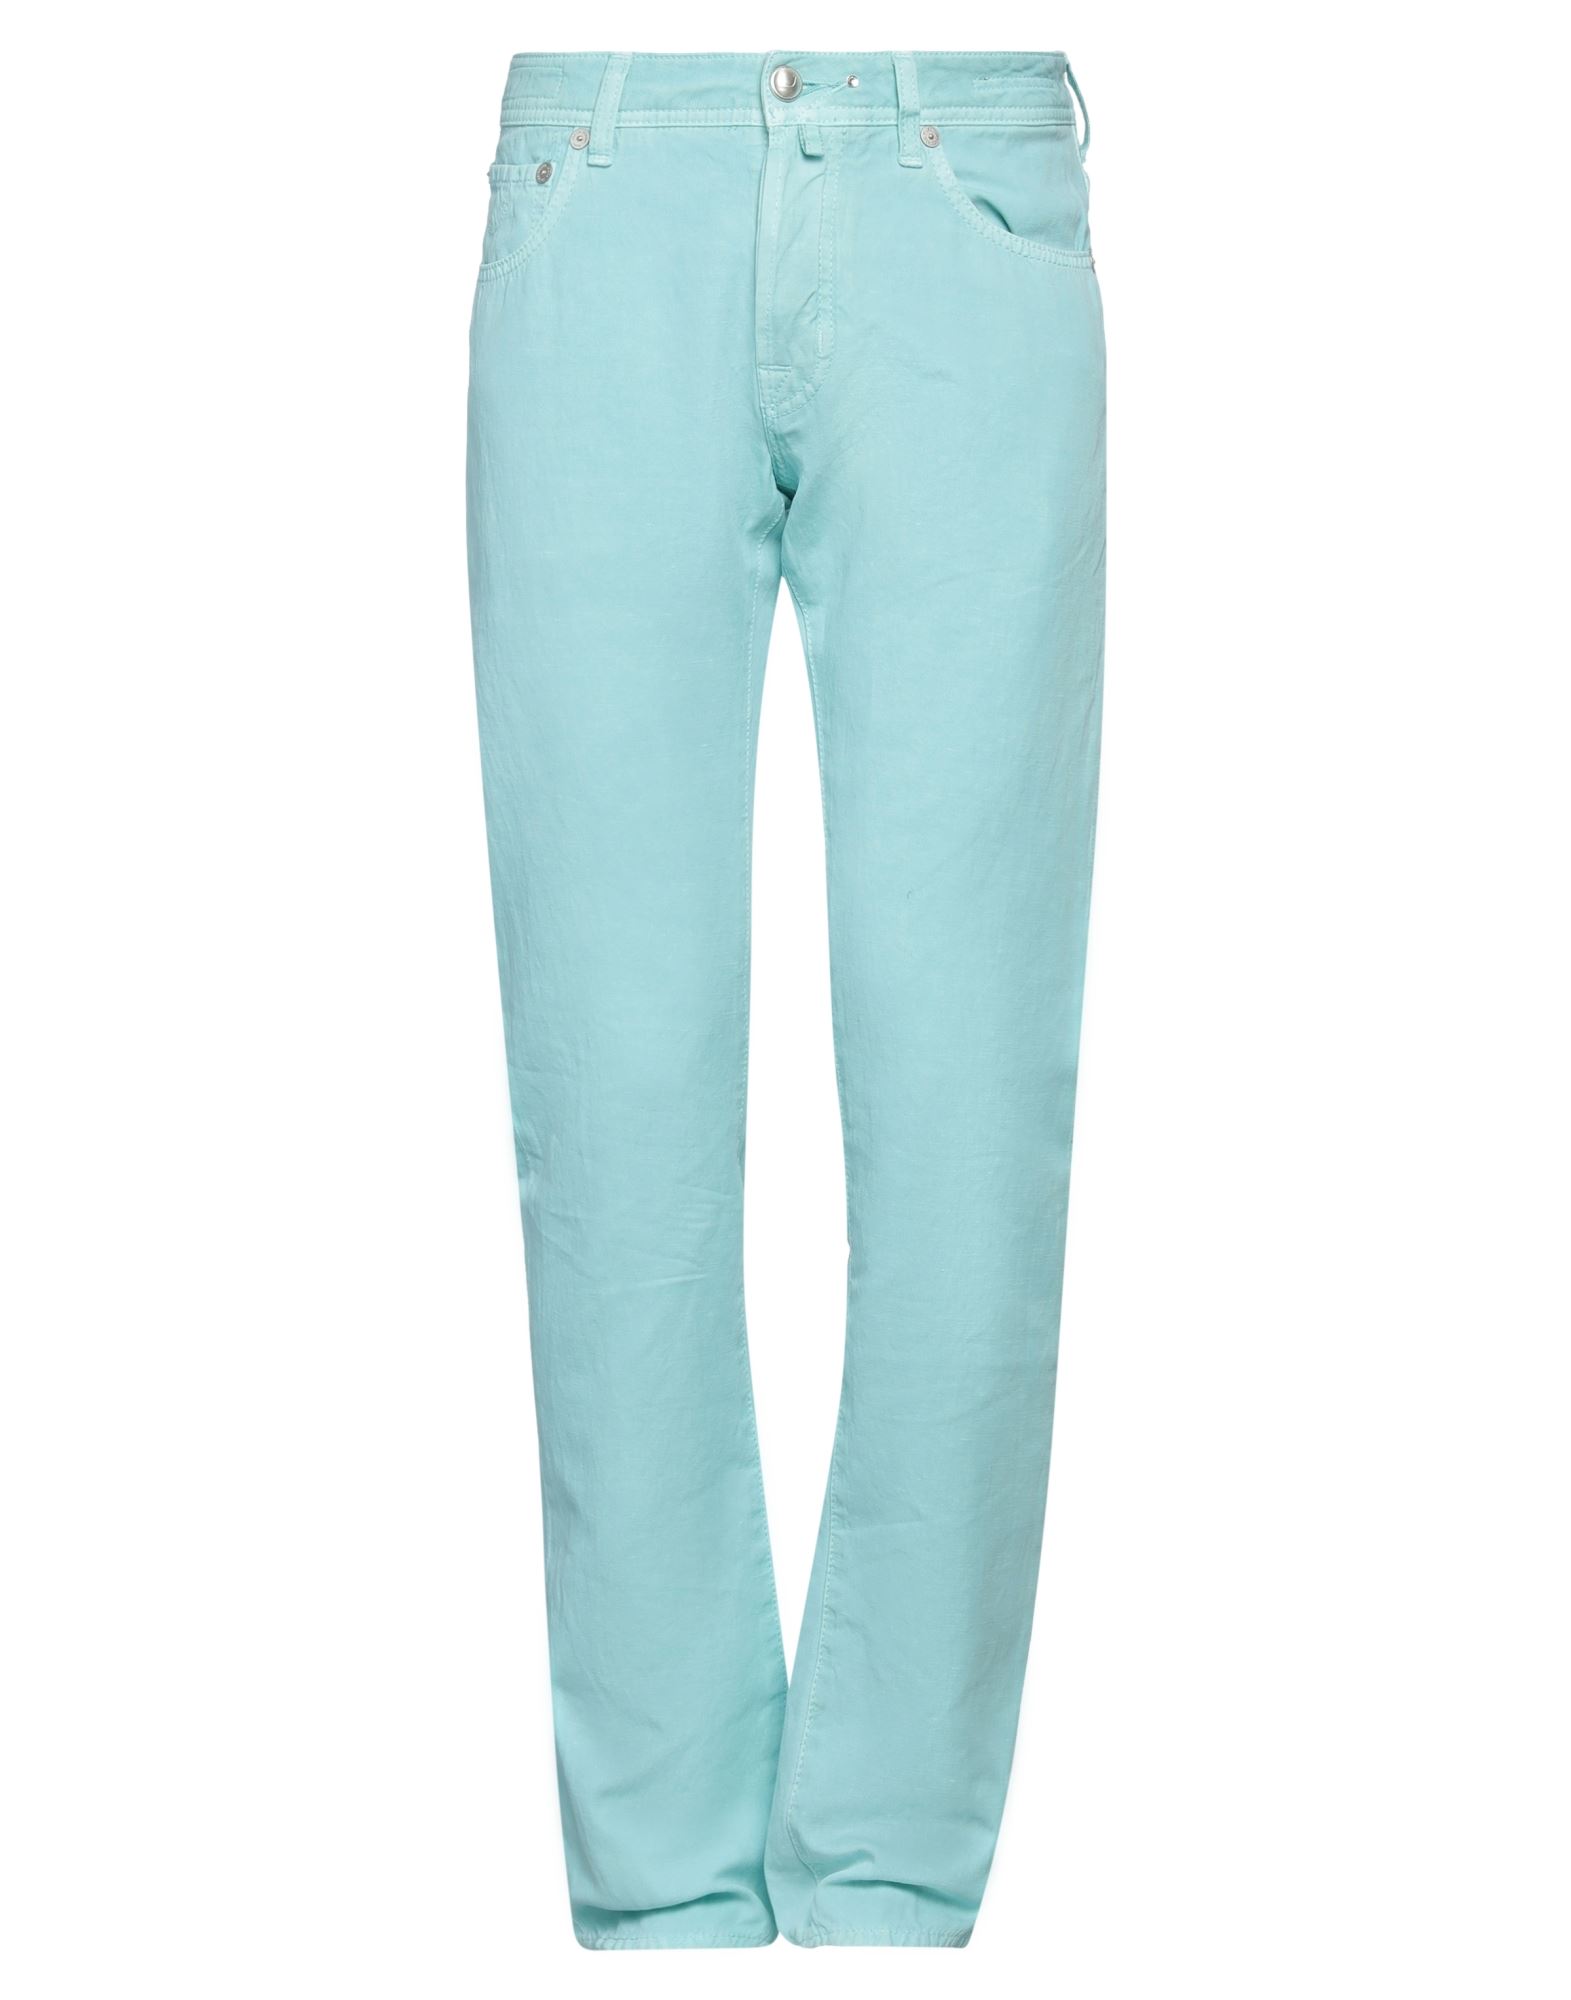 Jacob Cohёn Pants In Turquoise